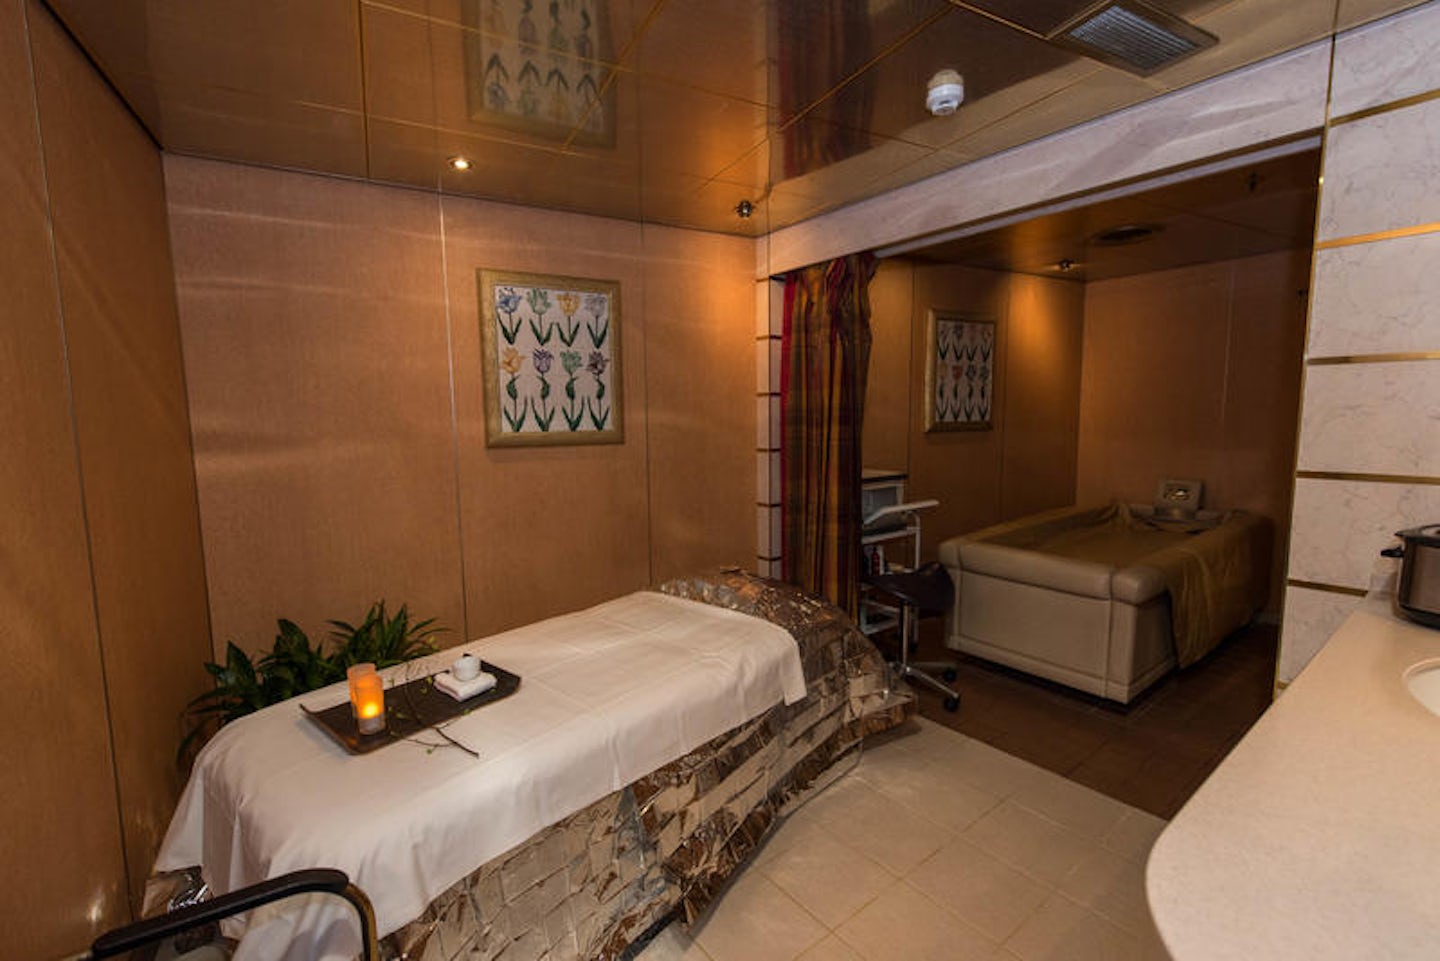 The Greenhouse Spa on Noordam